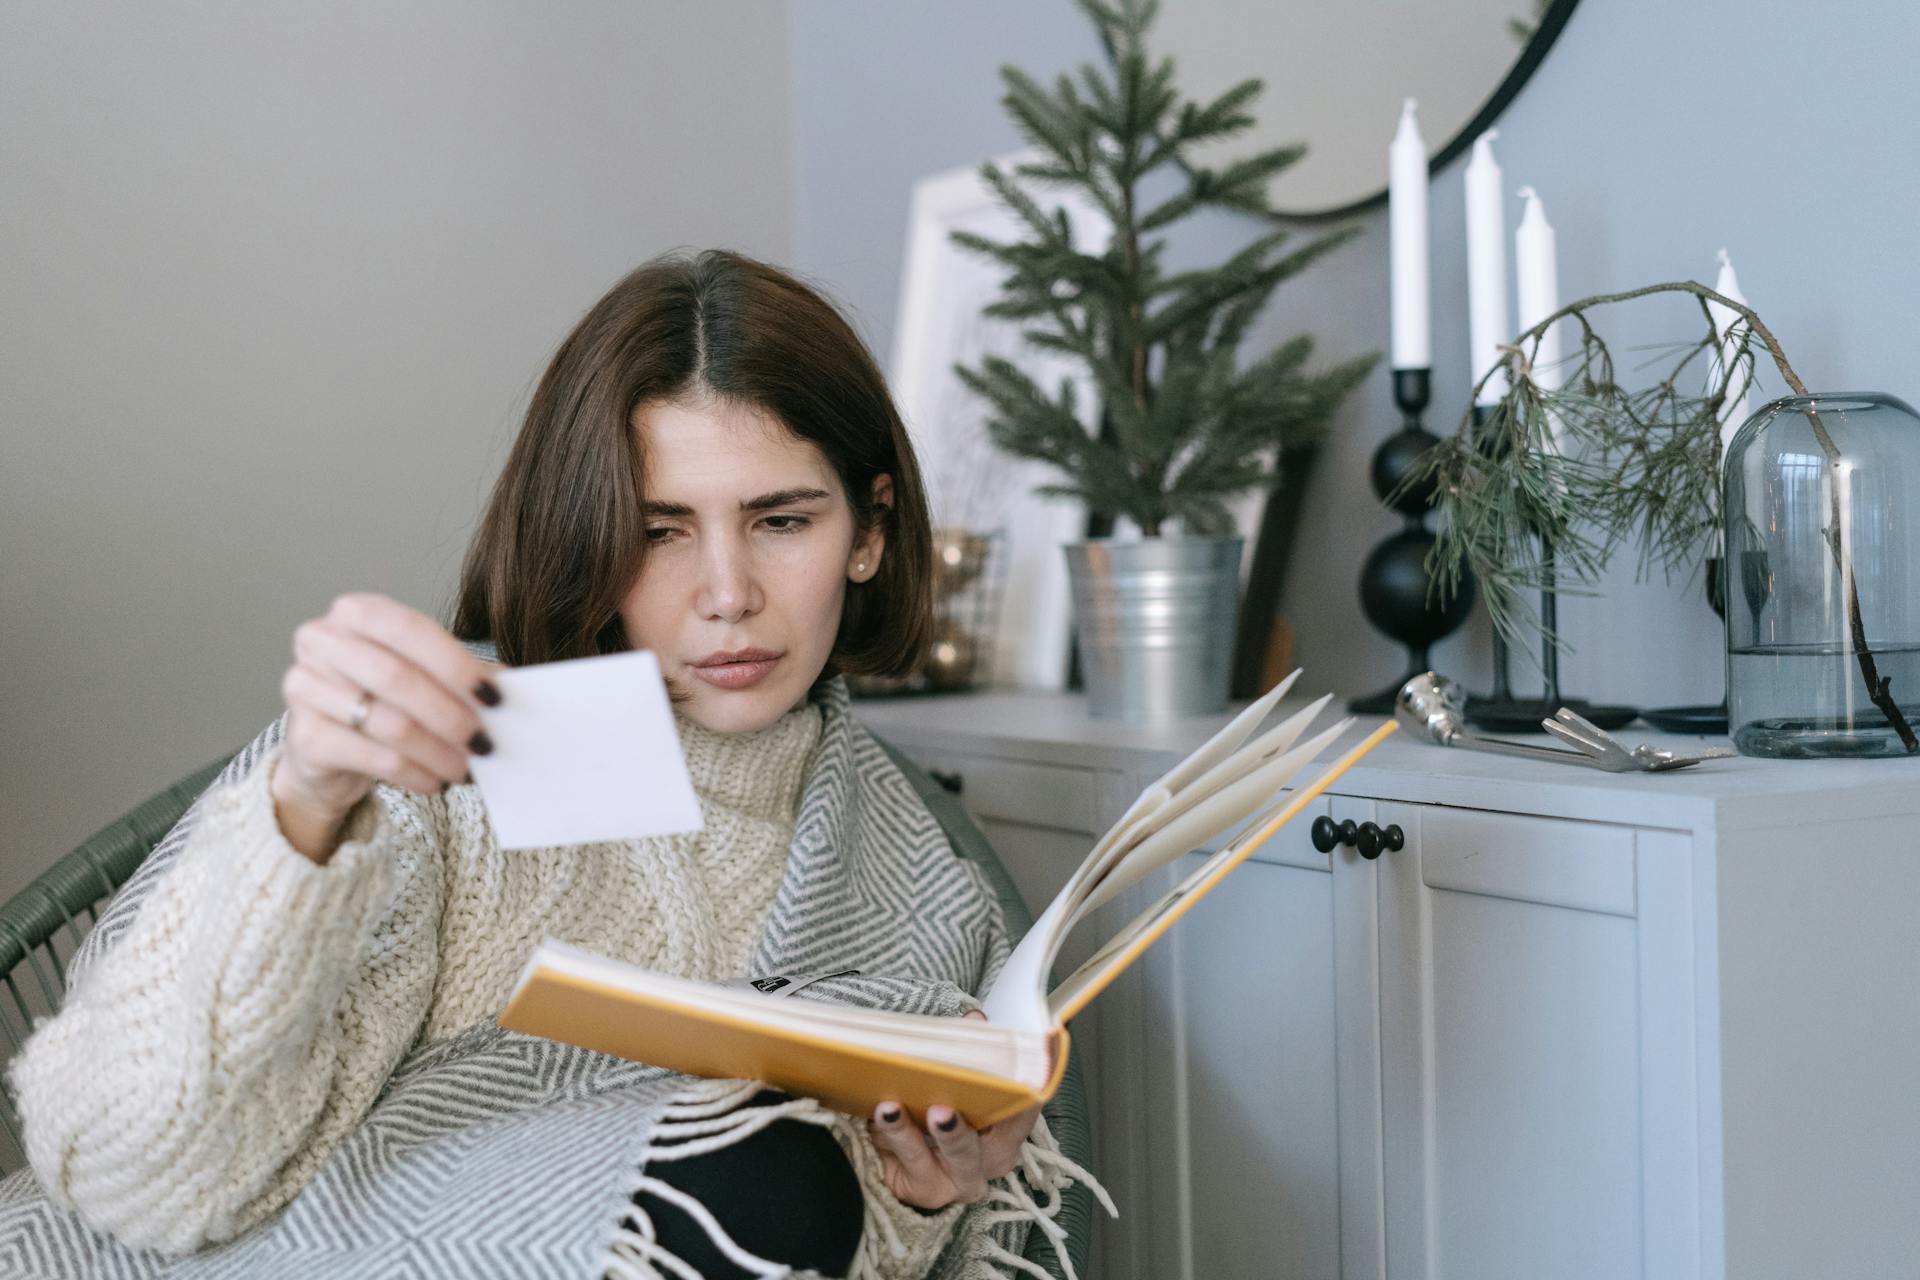 A woman frowning at a note | Source: Pexels